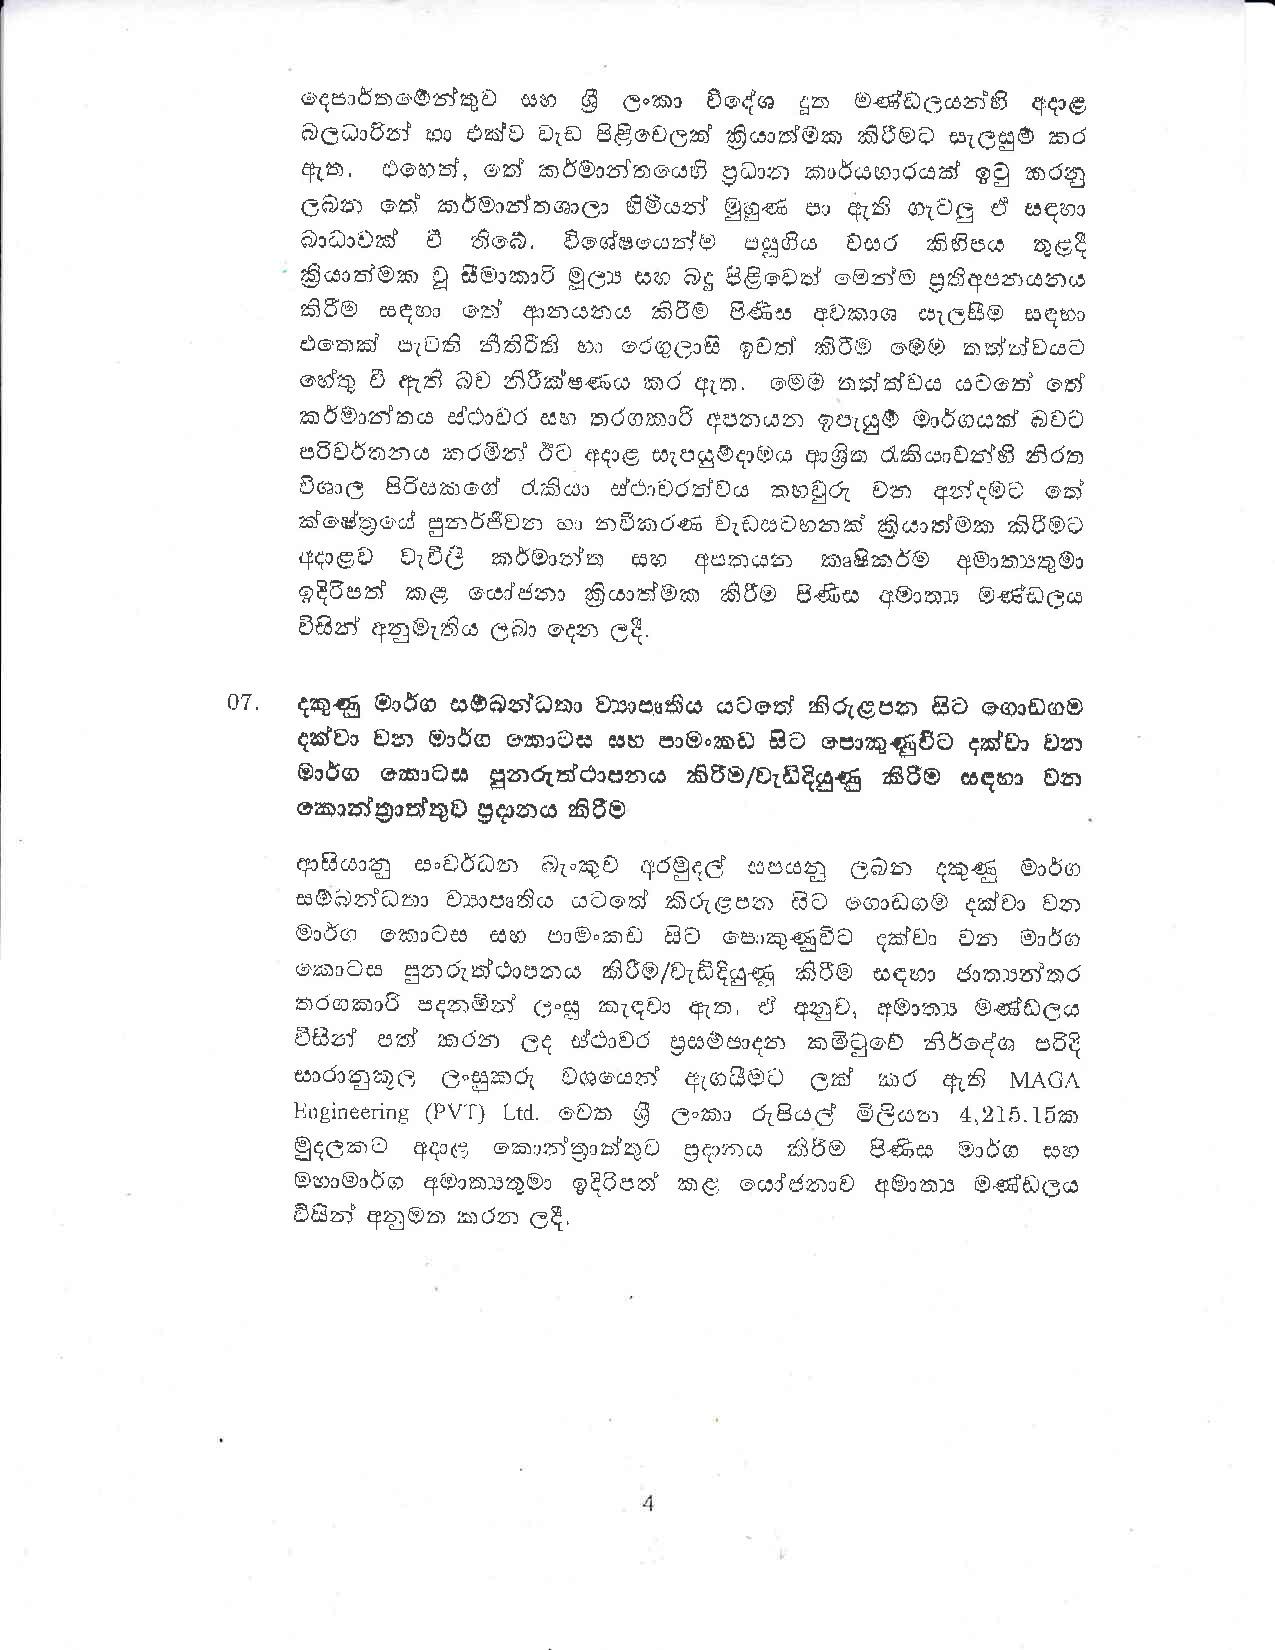 Cabinet Decision on 02.01.2020 1 page 004